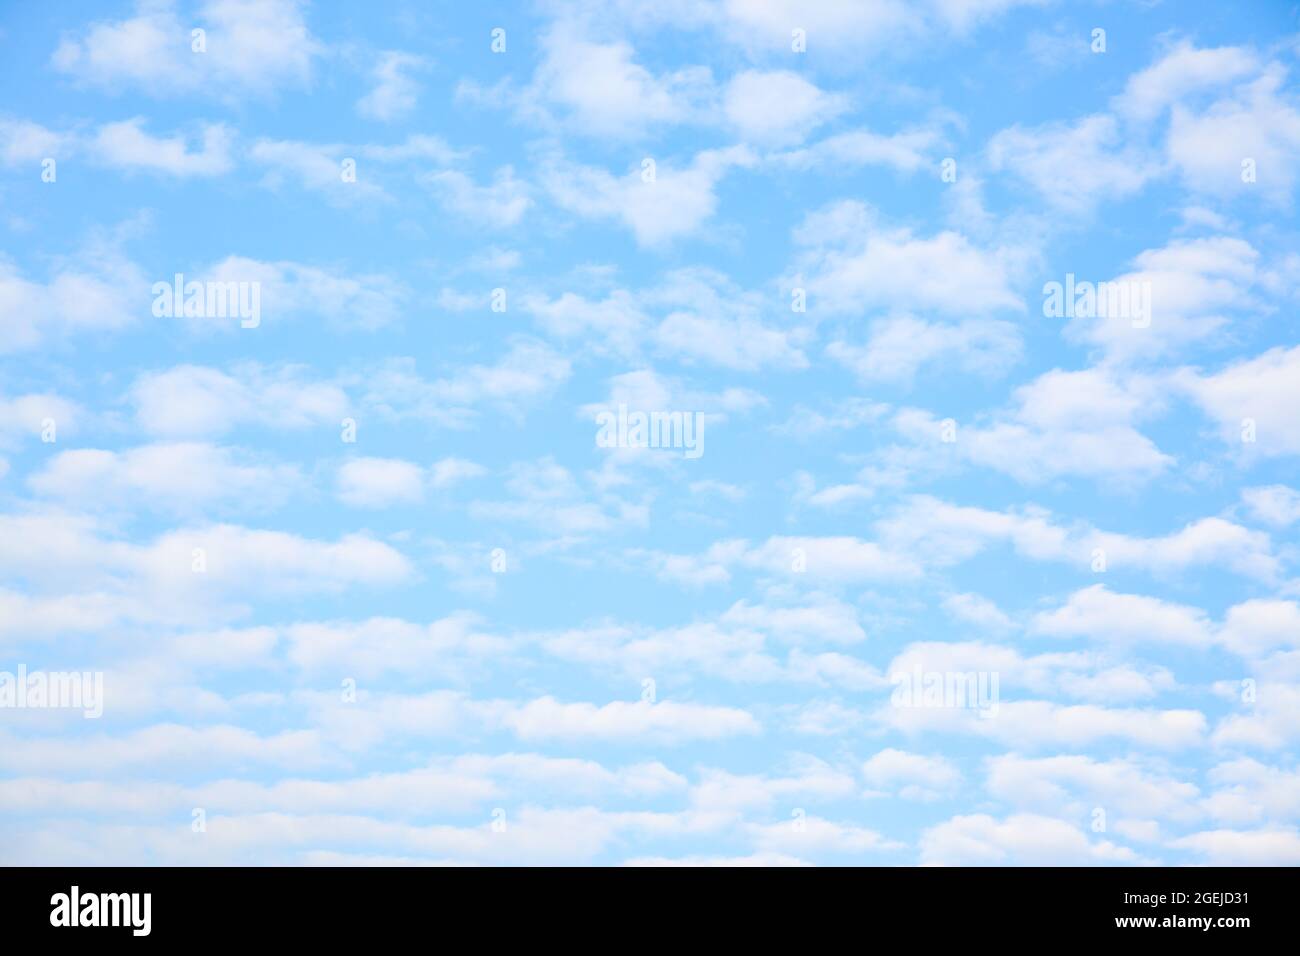 Multitude white small clouds in the sky , may be used as background Stock Photo